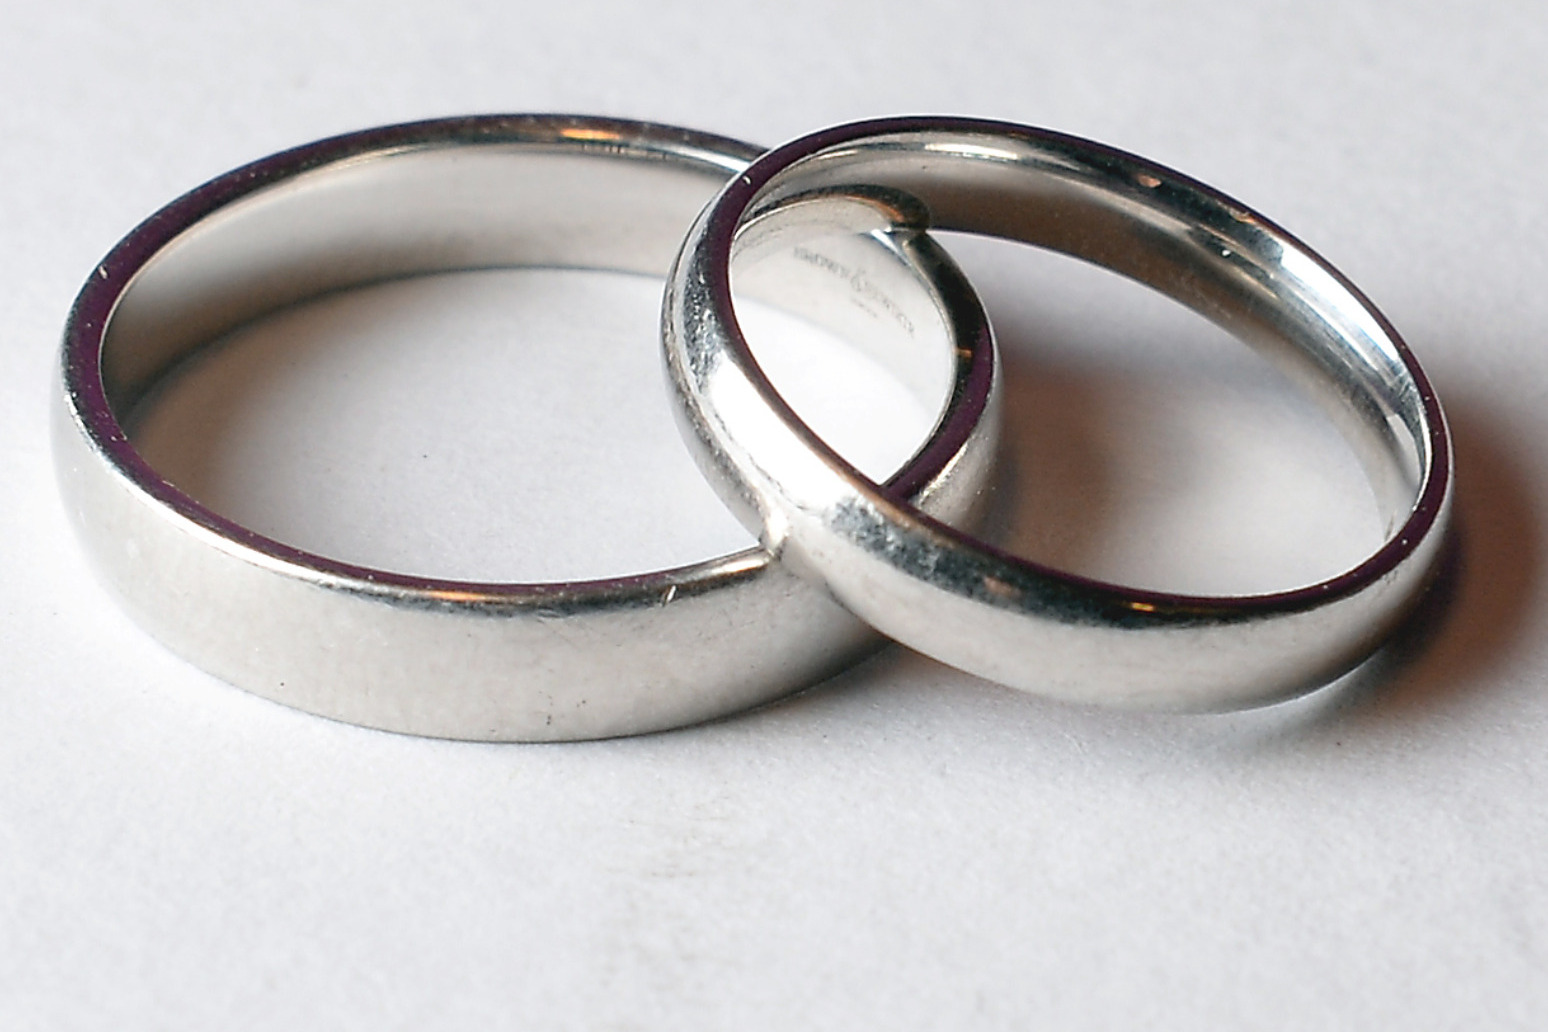 No-fault divorce law ‘hallelujah moment’ for couples who seek amicable split 